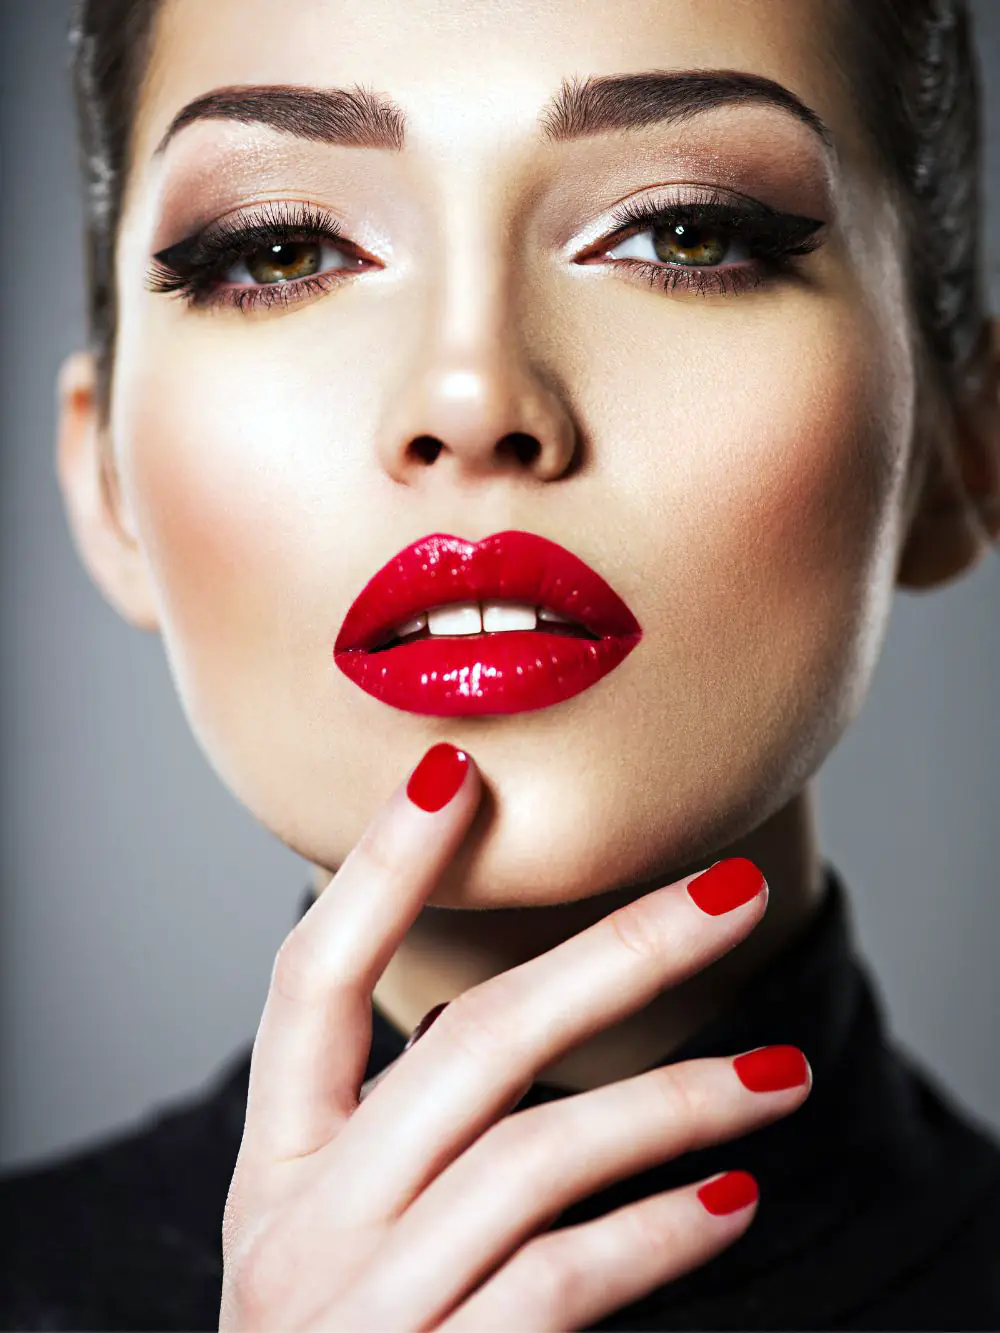 Girl's makeup with red lipstic